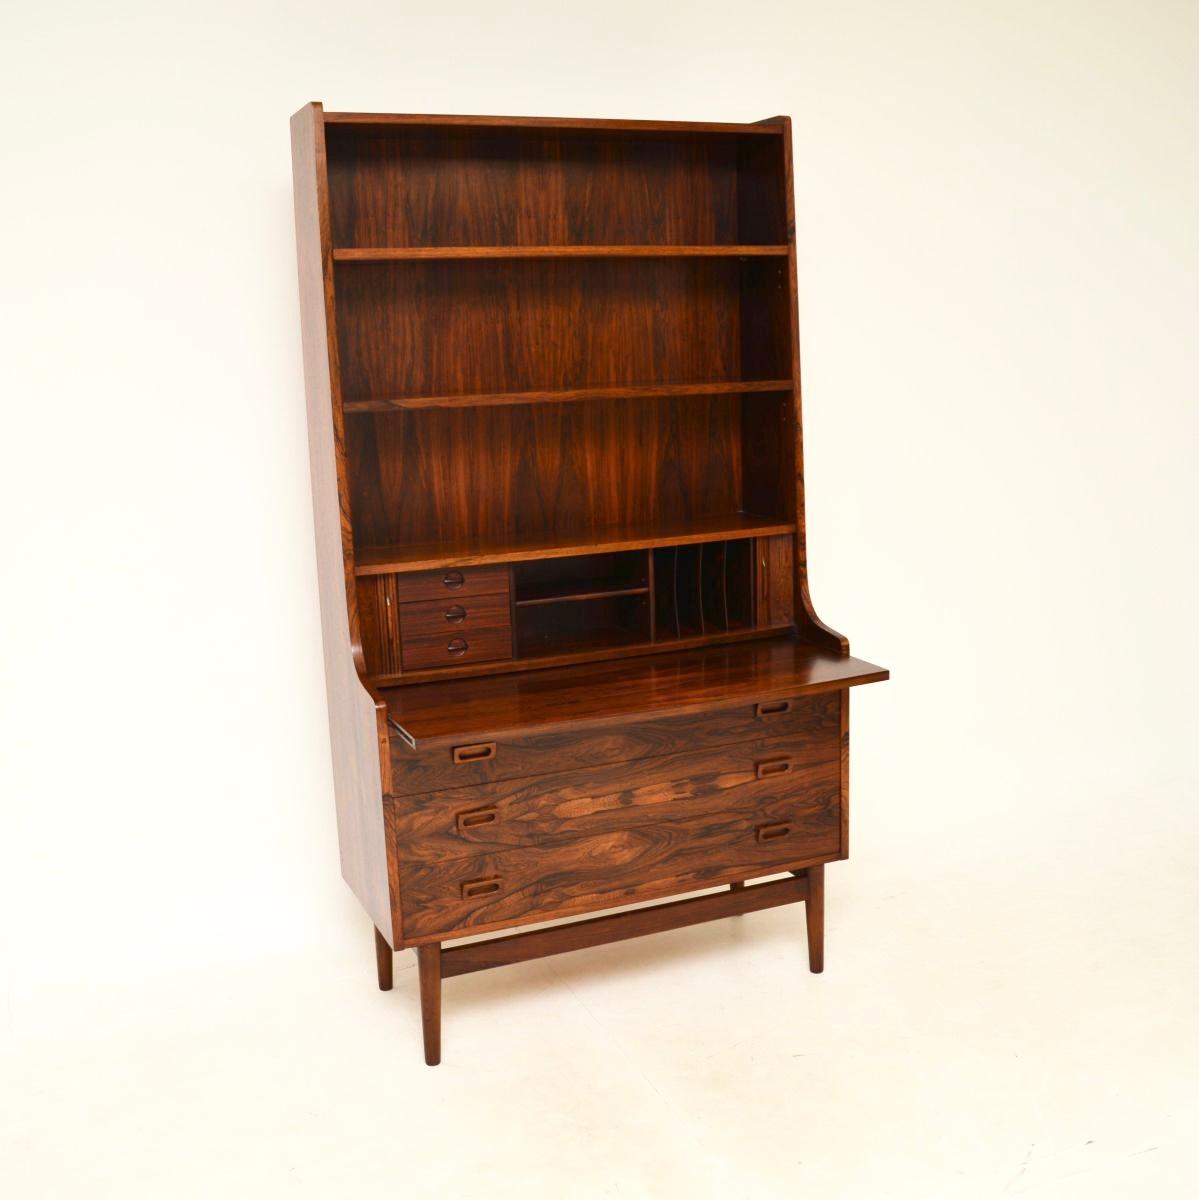 An absolutely stunning Danish vintage bureau bookcase by Johannes Sorth. This was made in Denmark, it is stamped and dated from 1972.

The quality is outstanding, this has incredibly beautiful grain patterns and has some lovely features. The lower